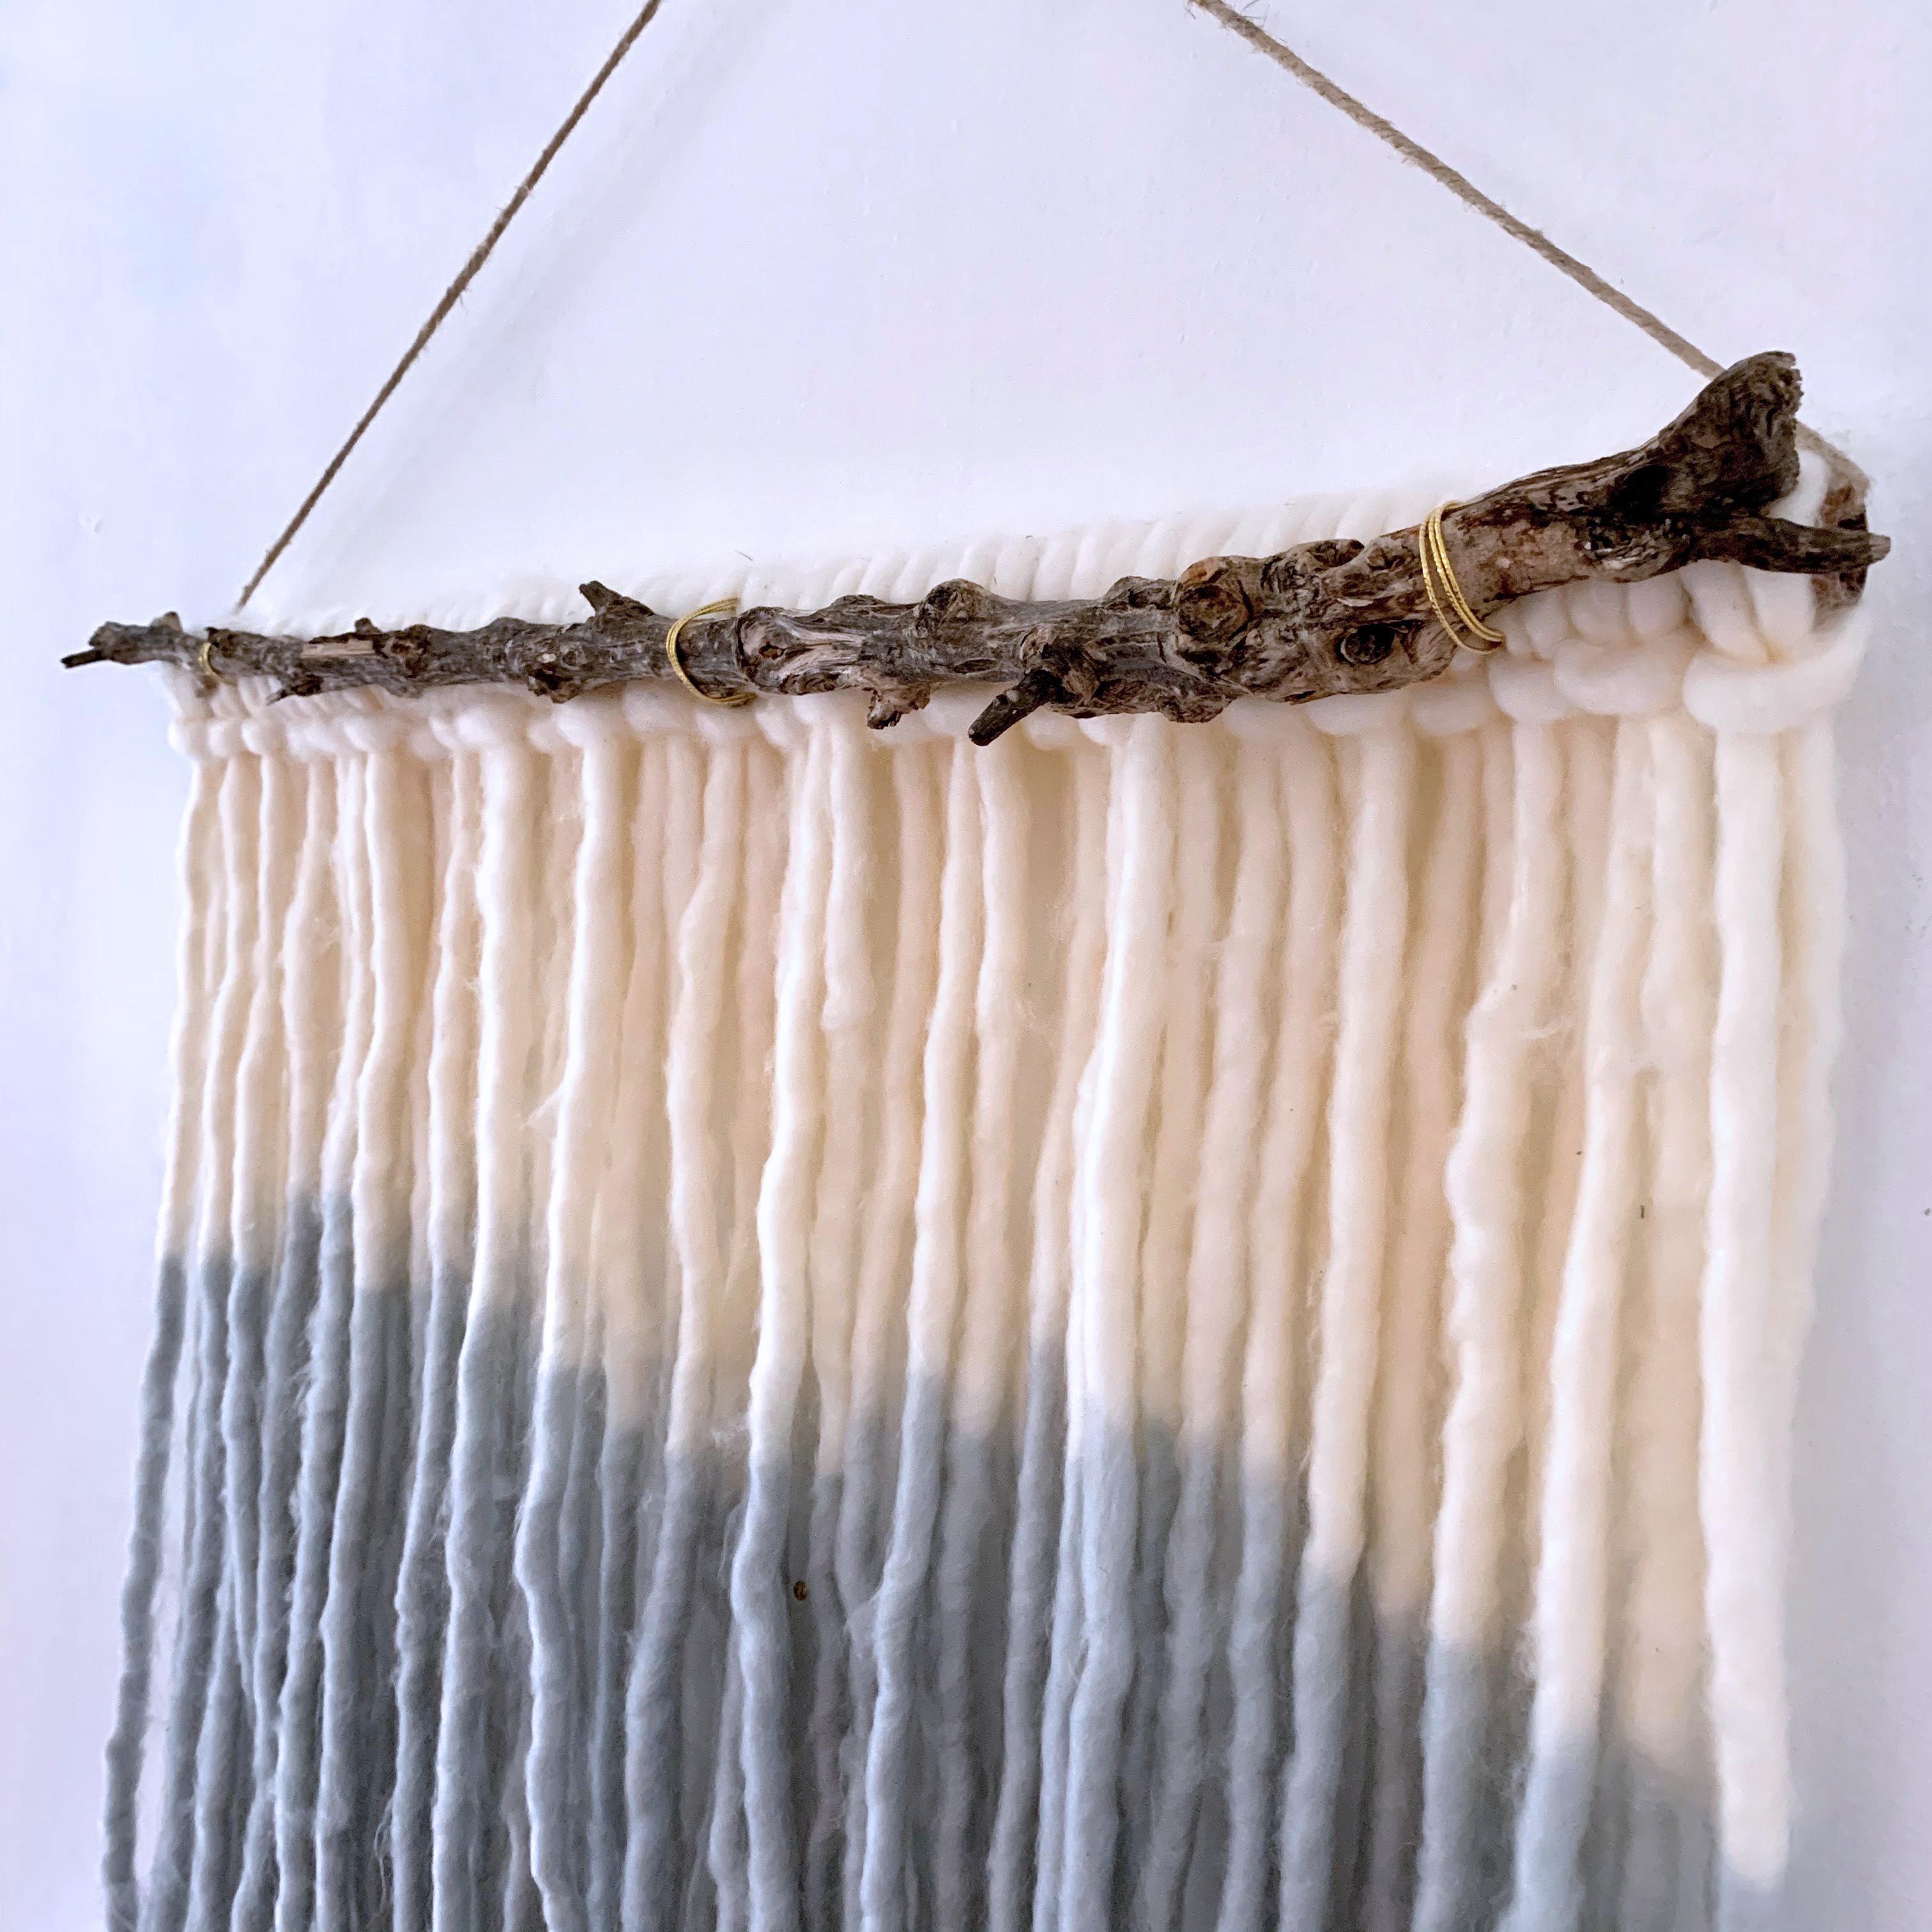 By the Shore, 2020, hand dyed Alpaca wool, wire, jute decorative wall hanging - Folk Art Art by Jacie Jane D'Agostino